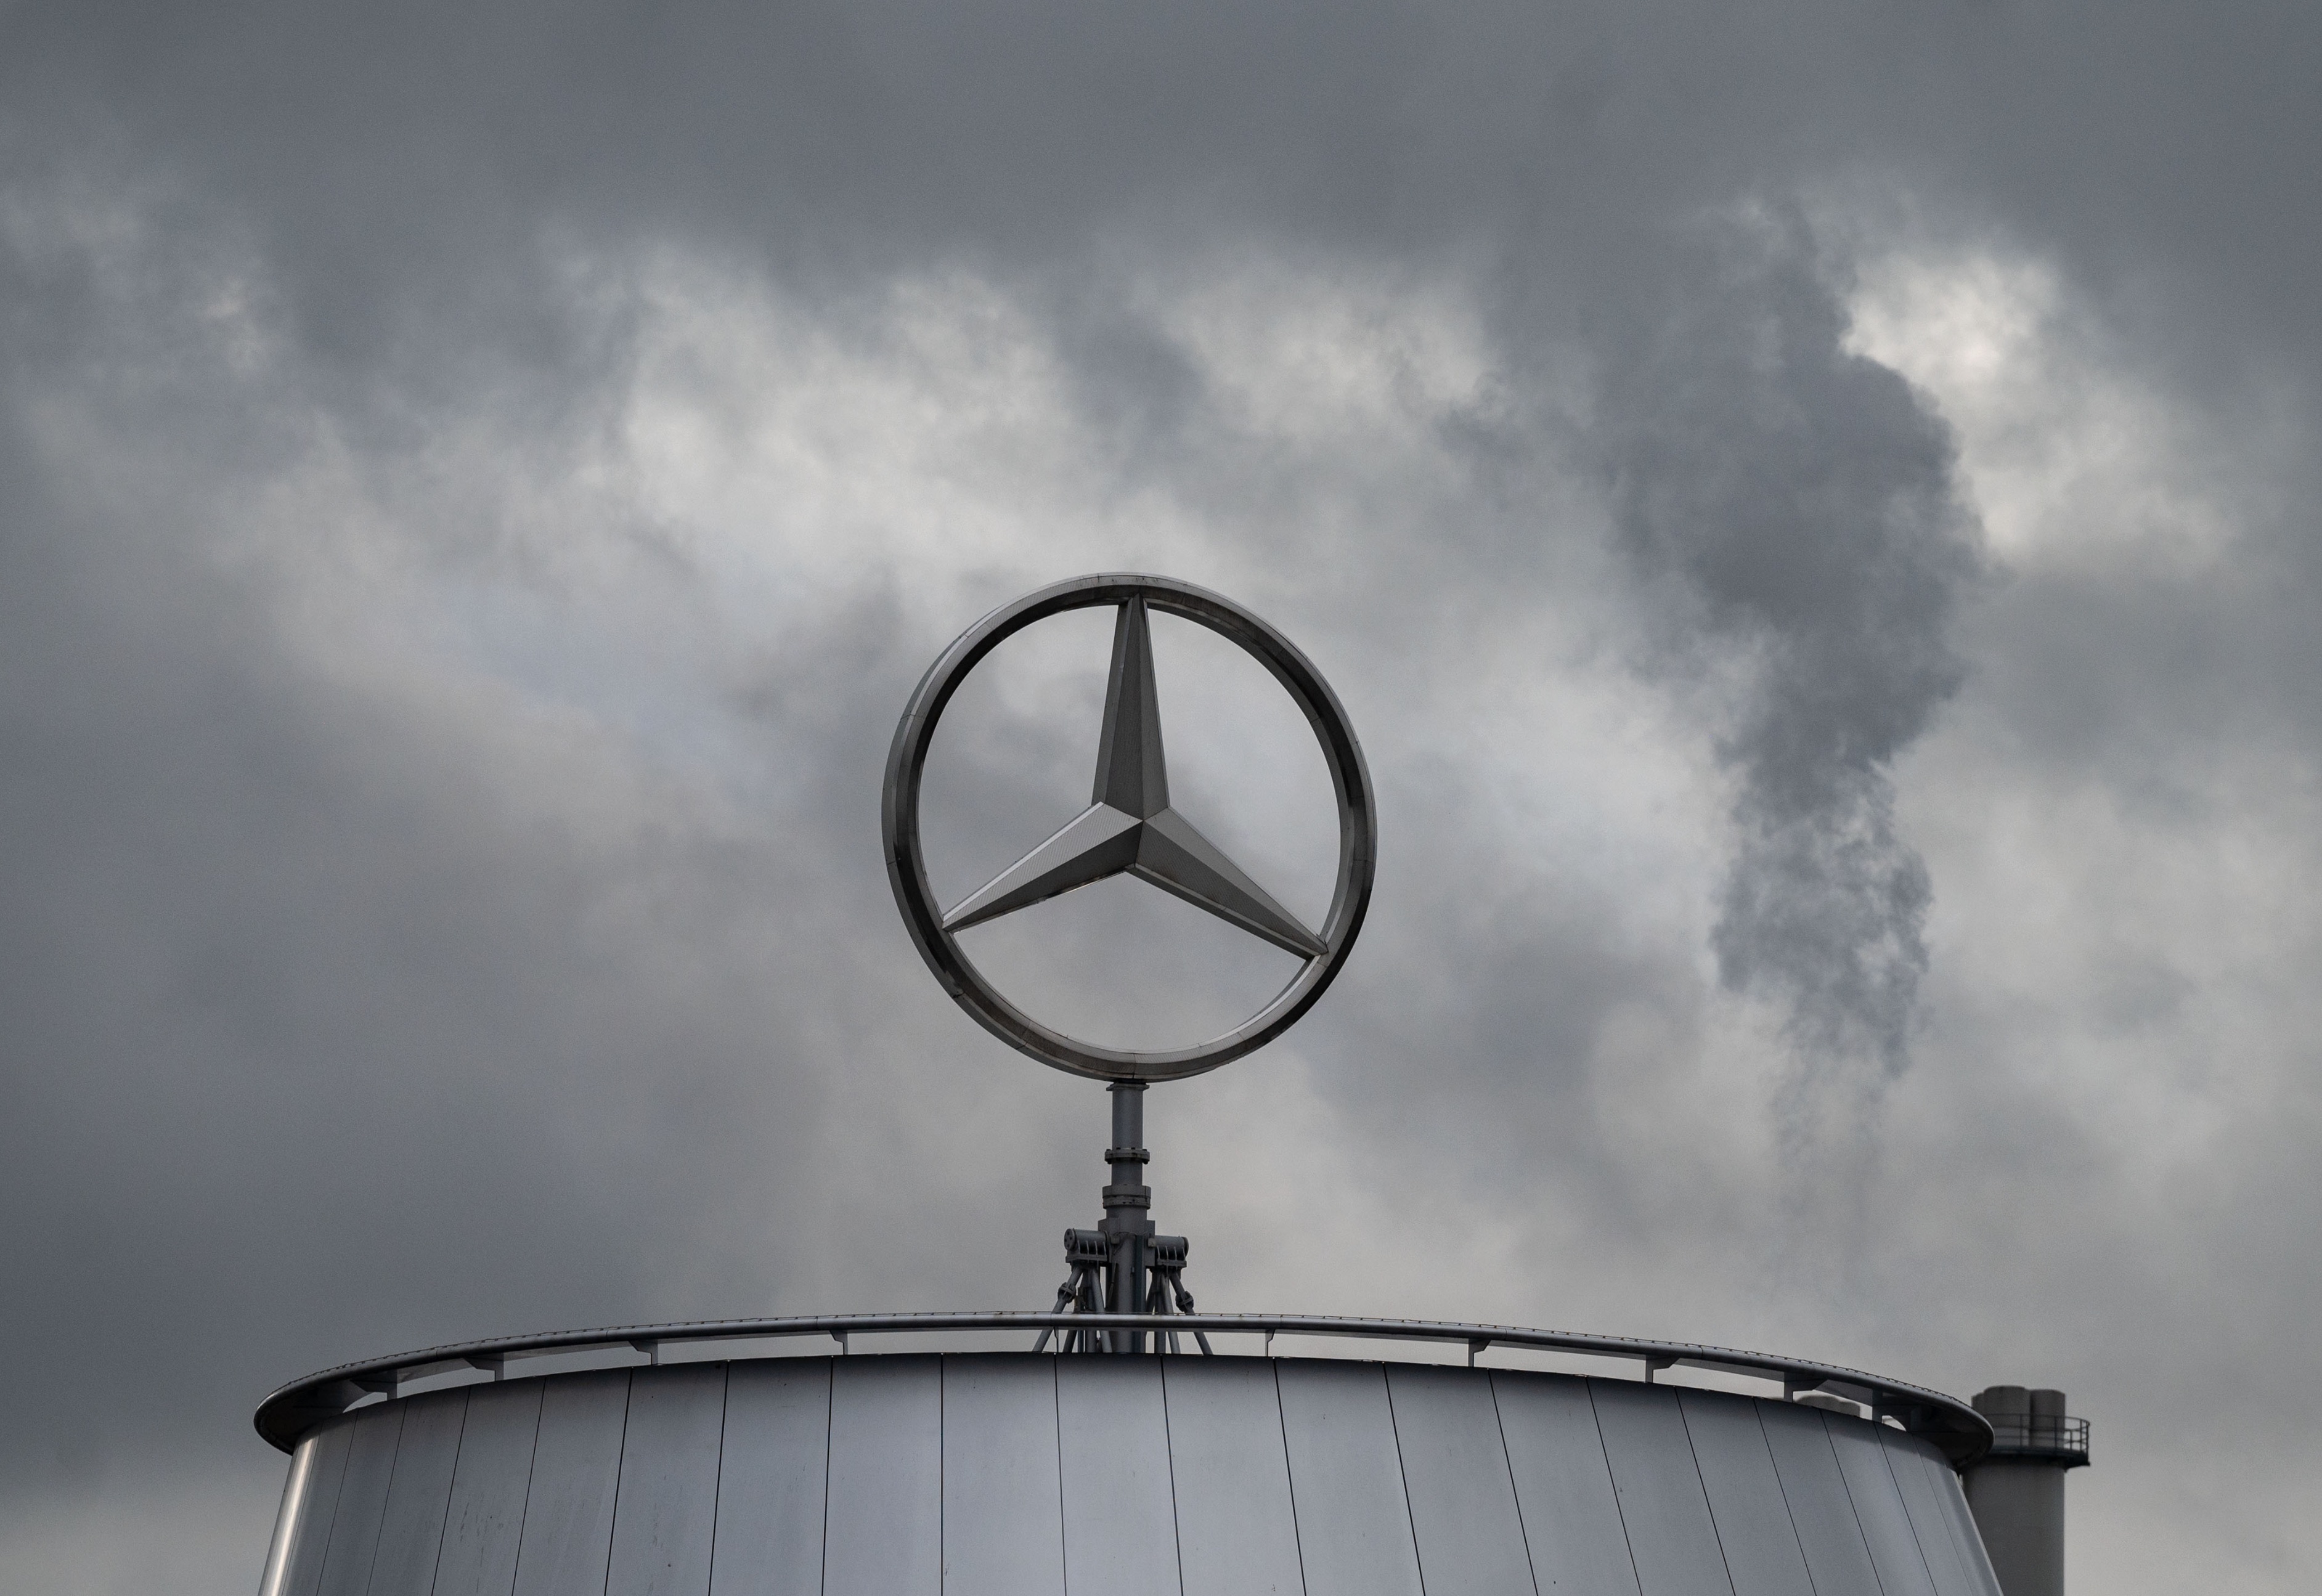 The Mercedes-Benz star against a cloudy sky